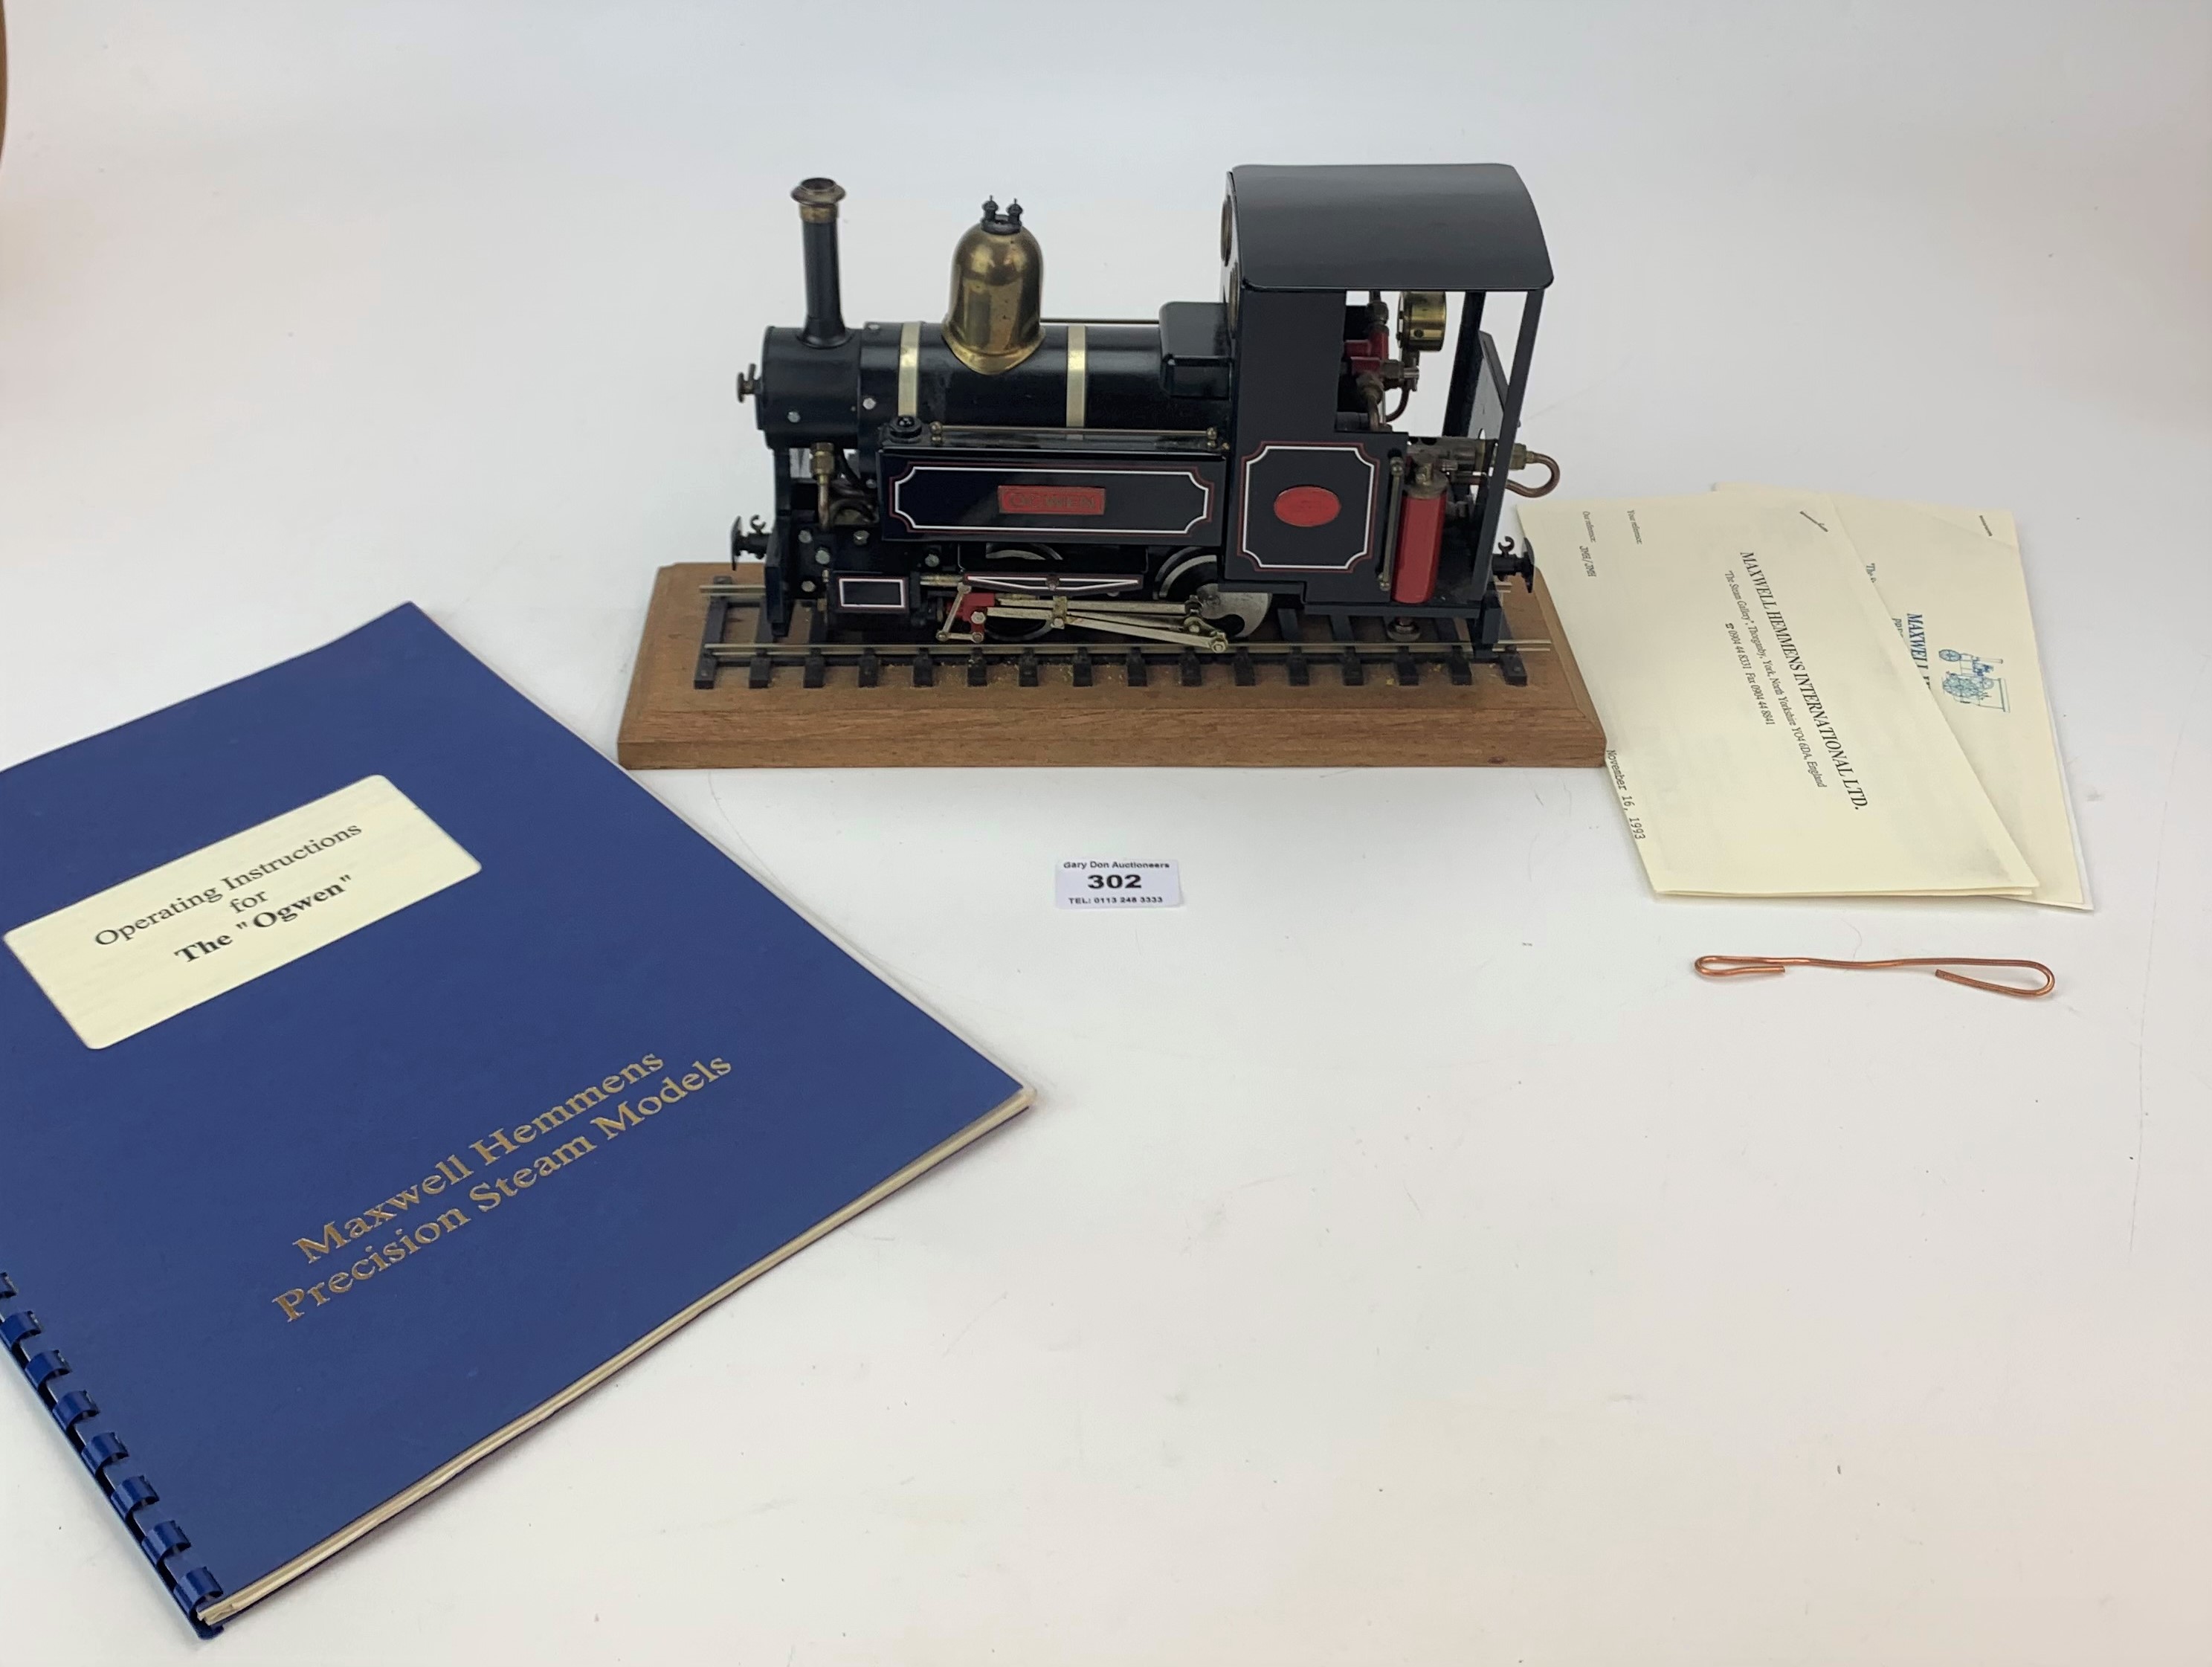 Steam train ‘Ogwen’ wood base and rail and receipt from Maxwell Hemmens Precision Steam Models